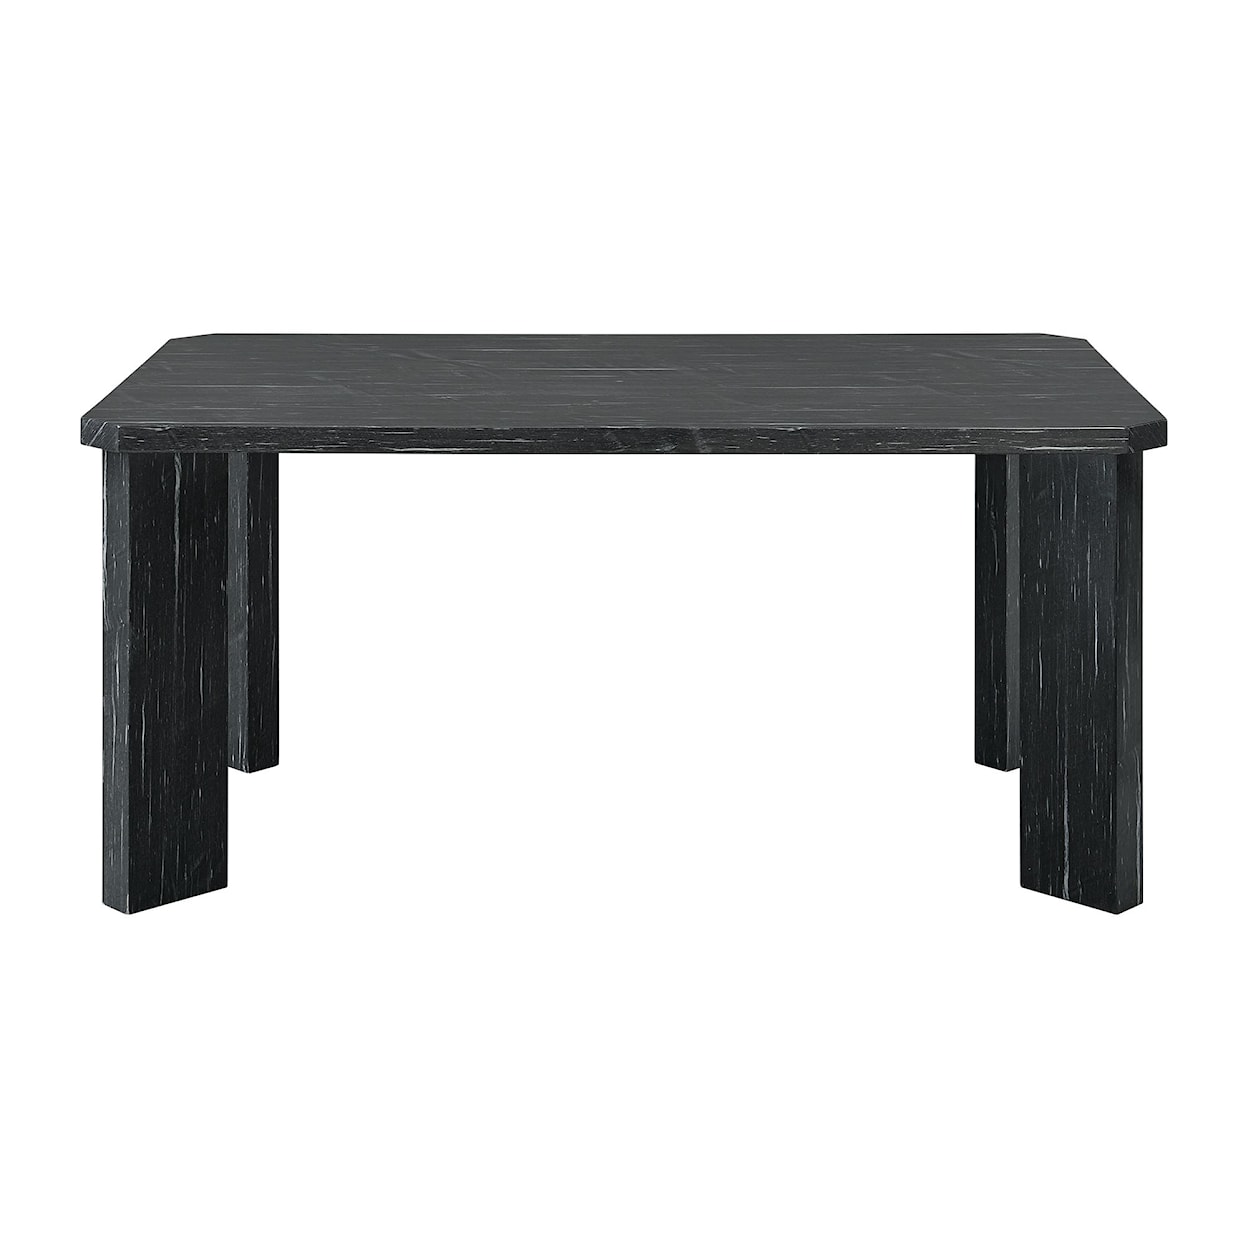 Elements Bellini Dining Table